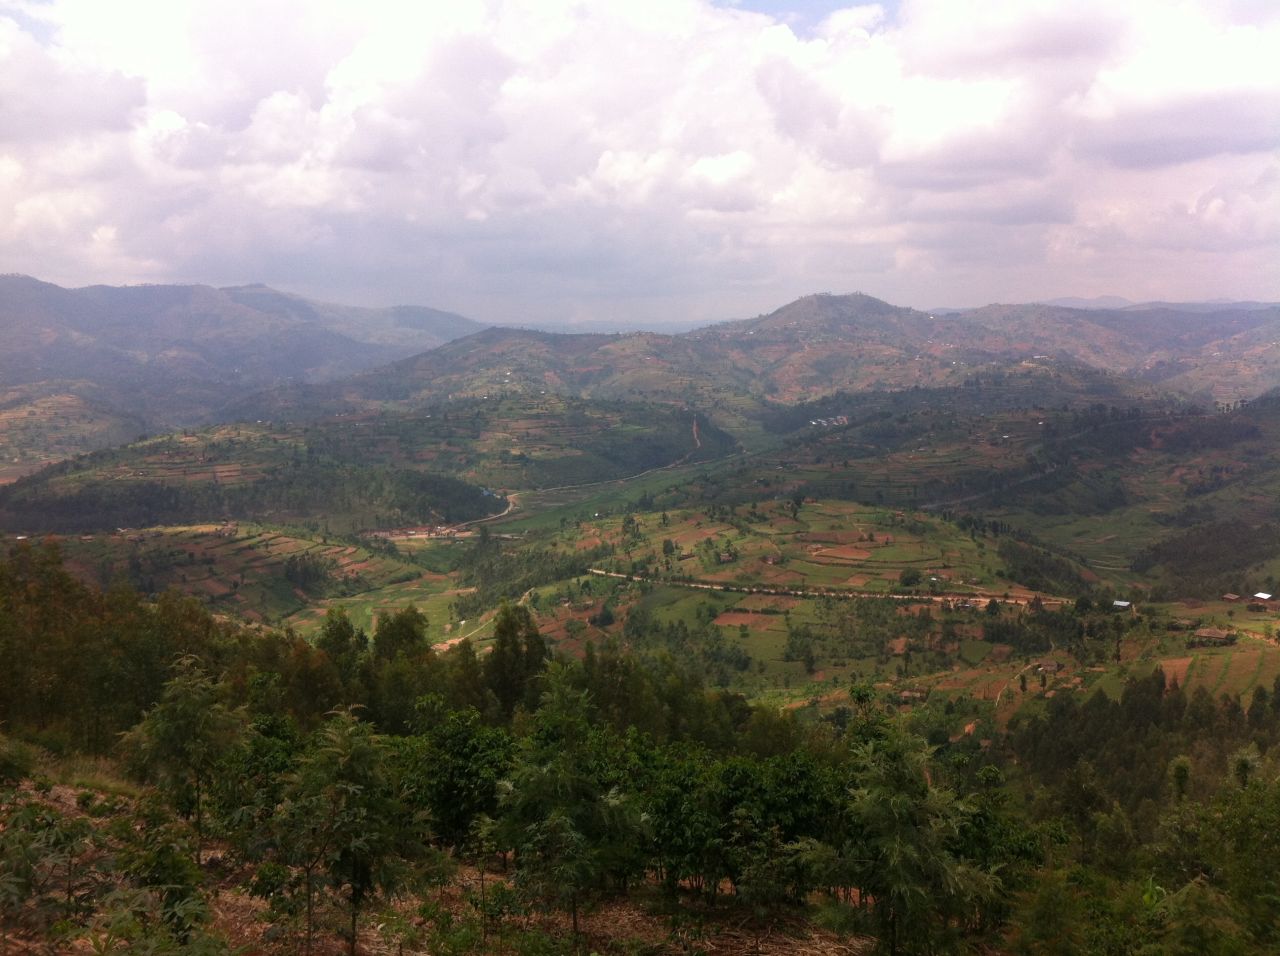 Rwanda is nicknamed the Land of a Thousands Hills for its countryside dotted with mountains, volcanoes and hillocks. "There are some <a href="http://ireport.cnn.com/docs/DOC-1115370">places that touch you</a> and touch you quickly. Rwanda was one of those places," says aid worker LeAnn Hager, who lived there between 2012 and 2014.